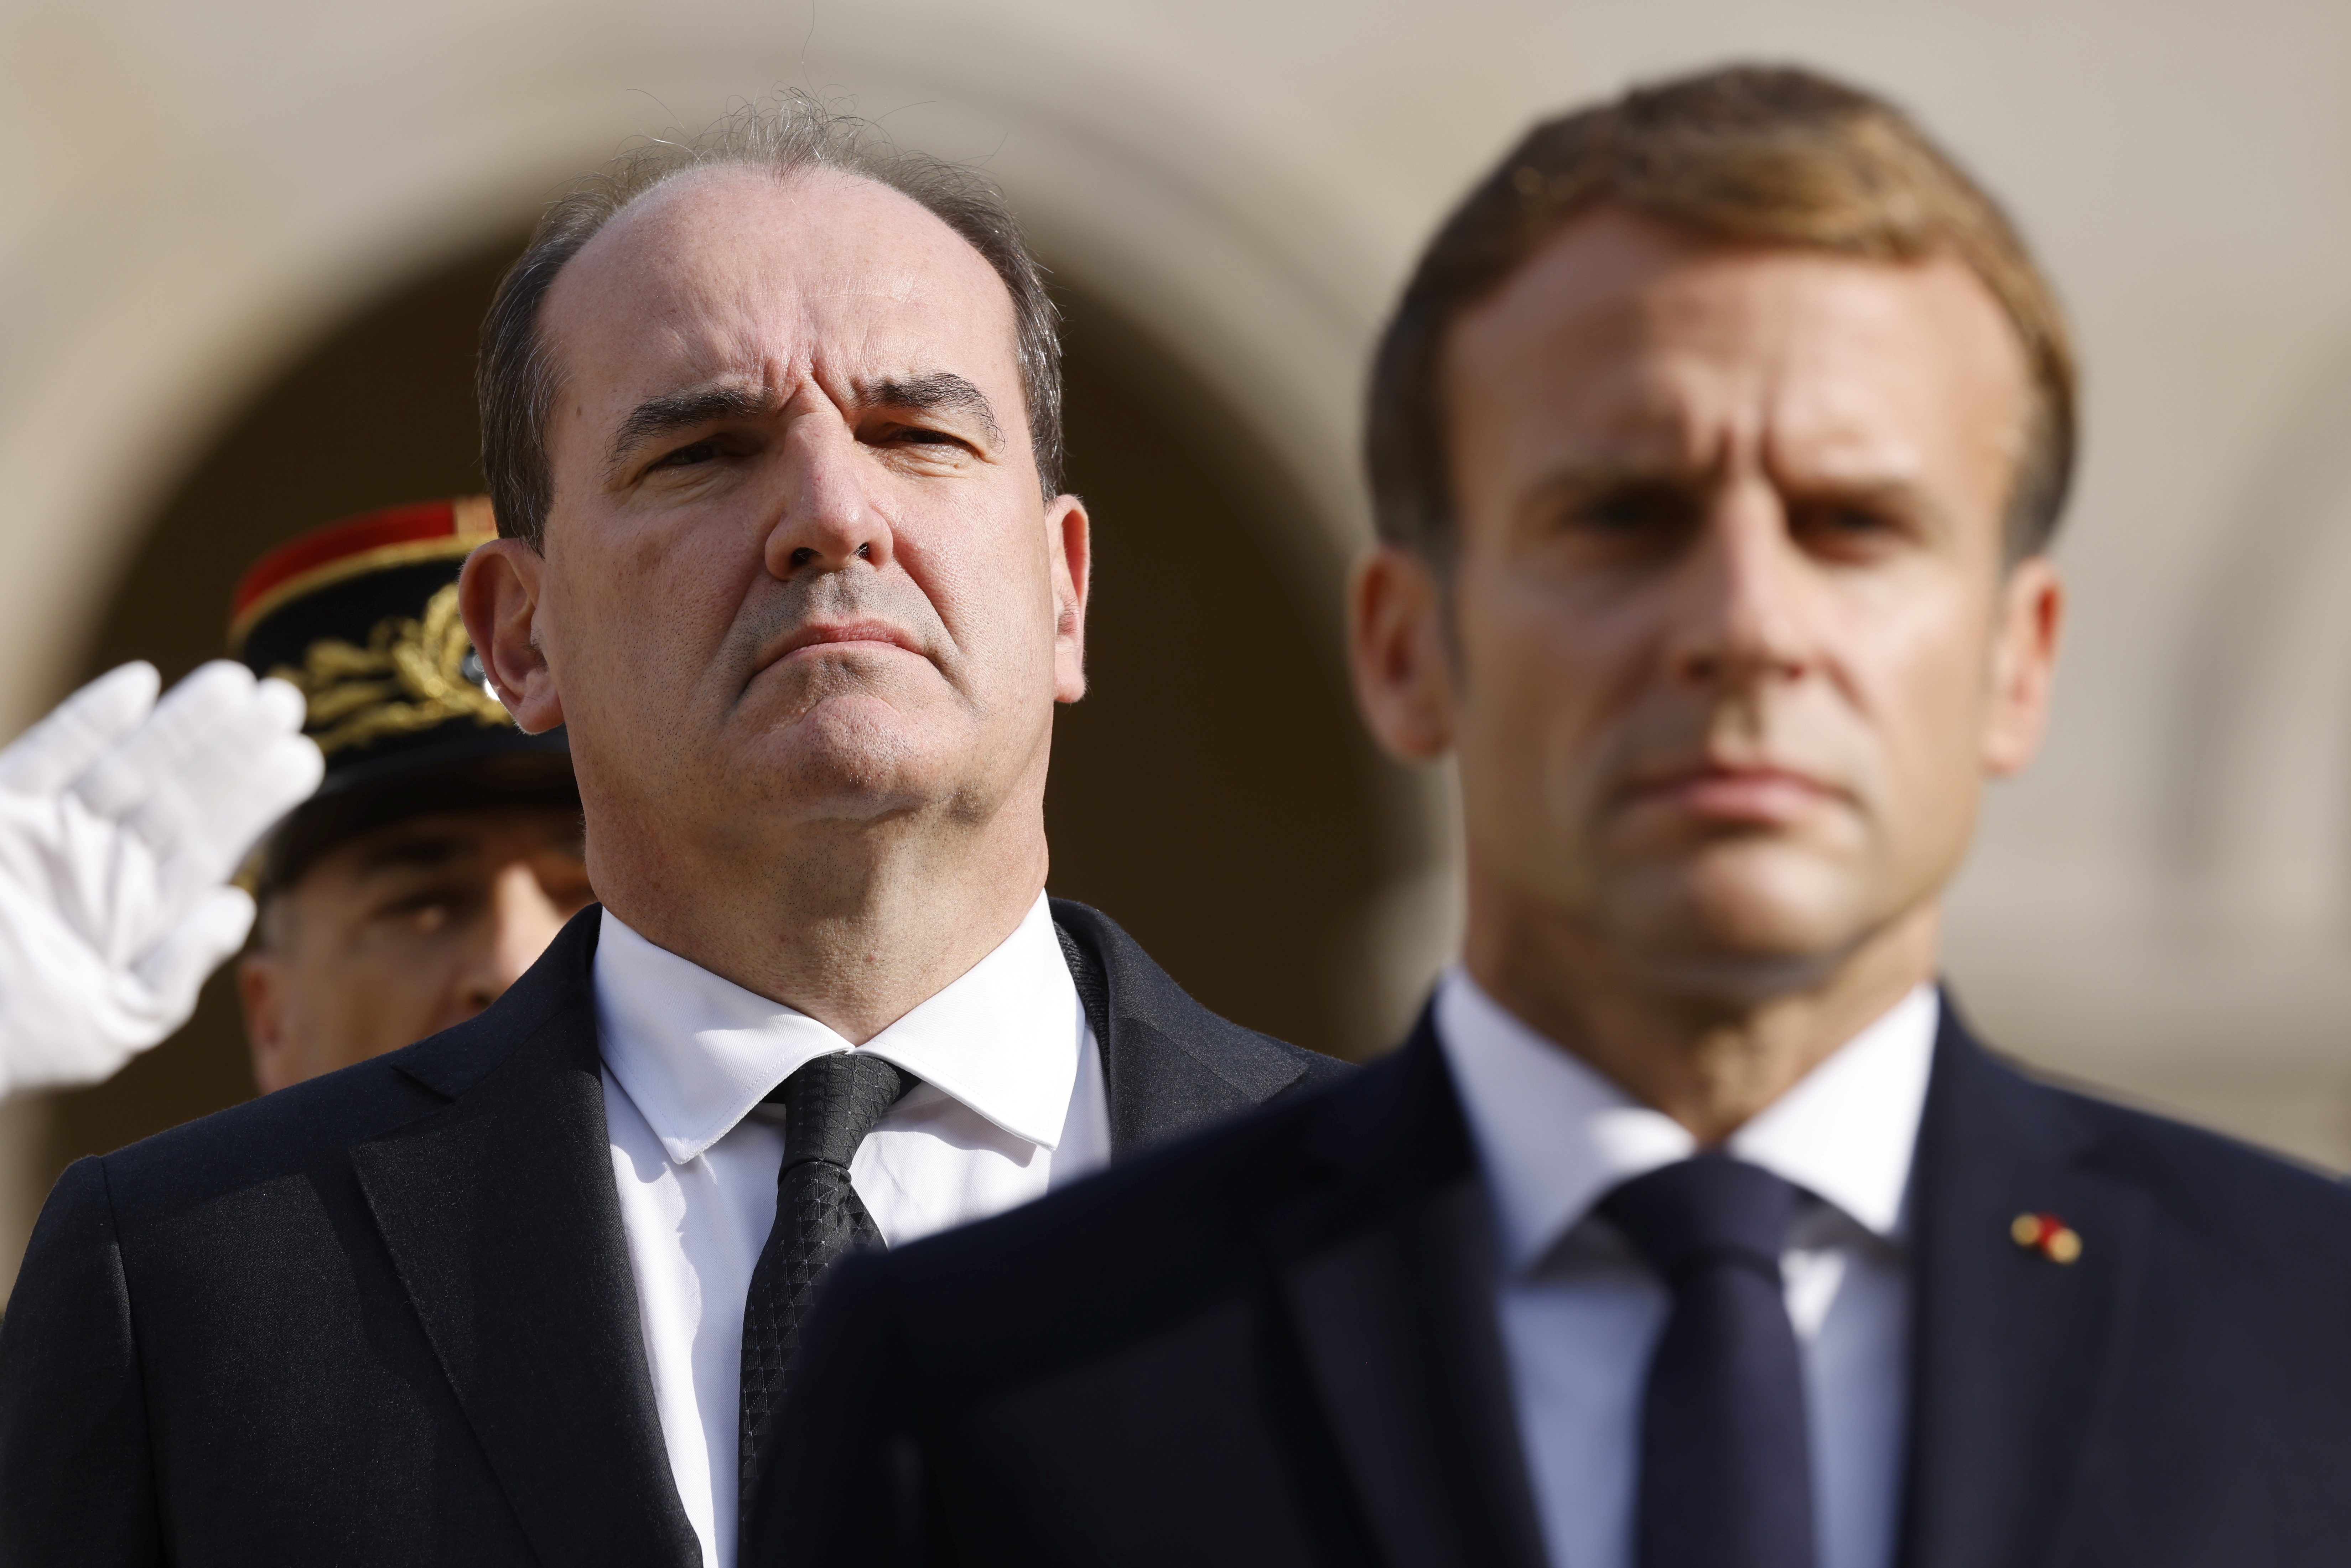 French PM, paying tribute to slain teacher, says France will defend its values